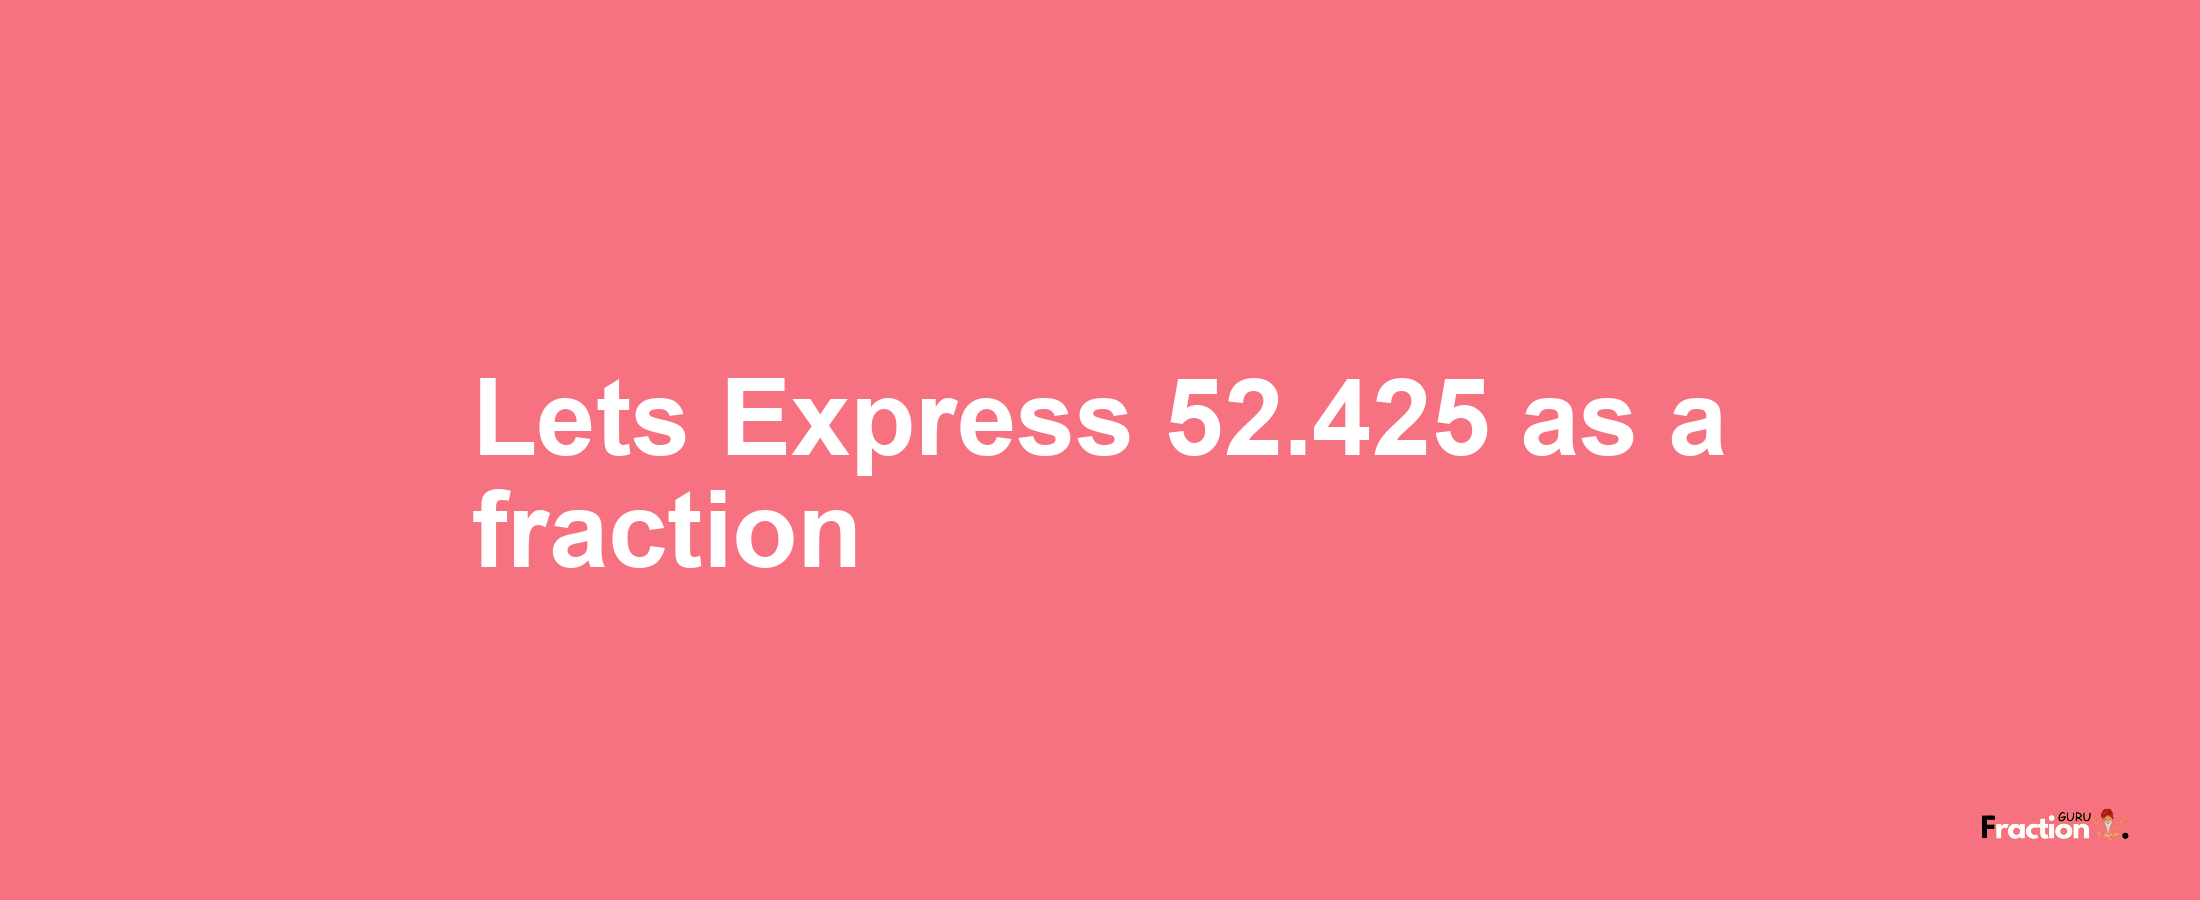 Lets Express 52.425 as afraction